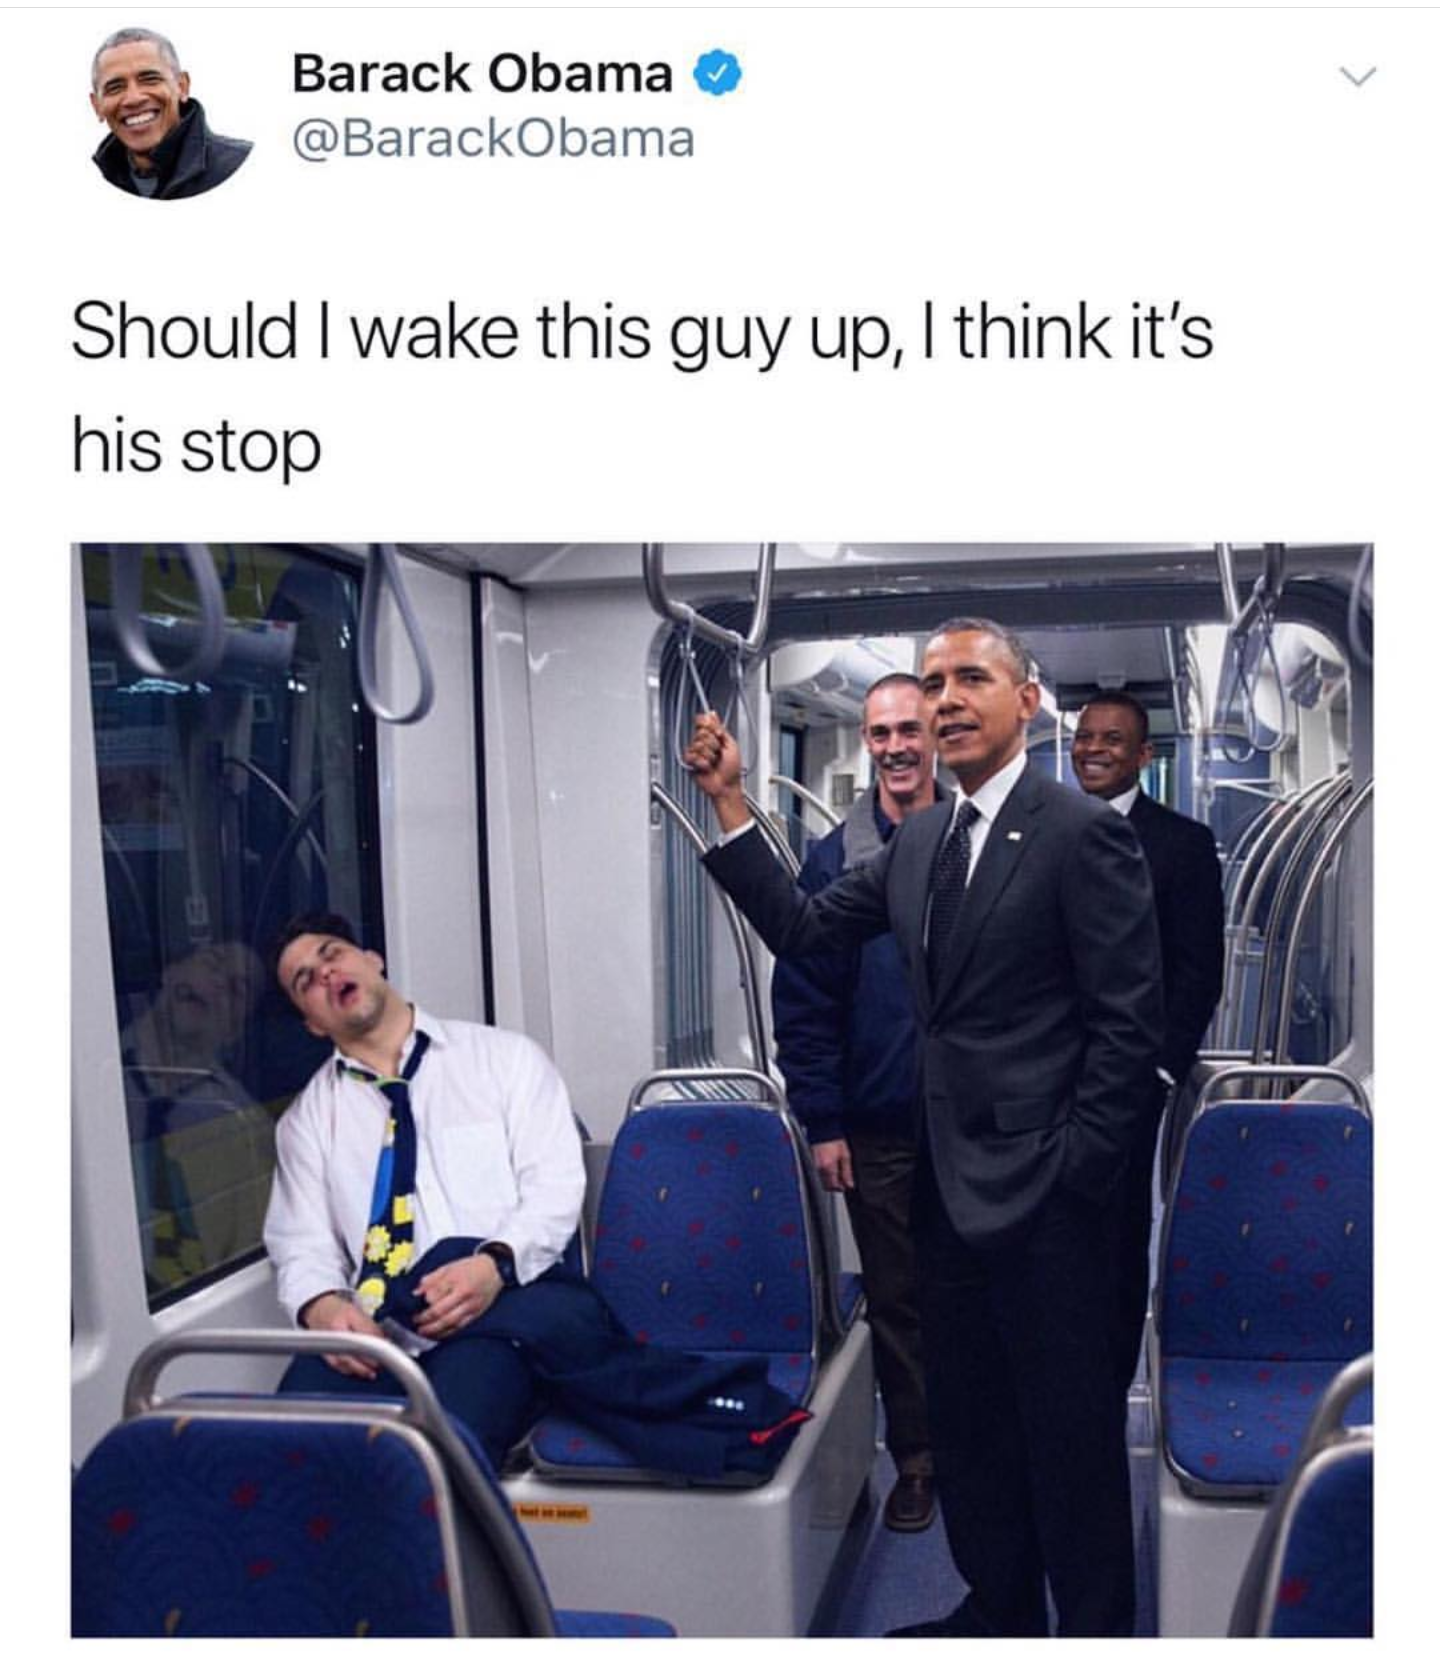 Tweet of Obama on the subway next to a sleeping passenger with joke about how he should wake him up